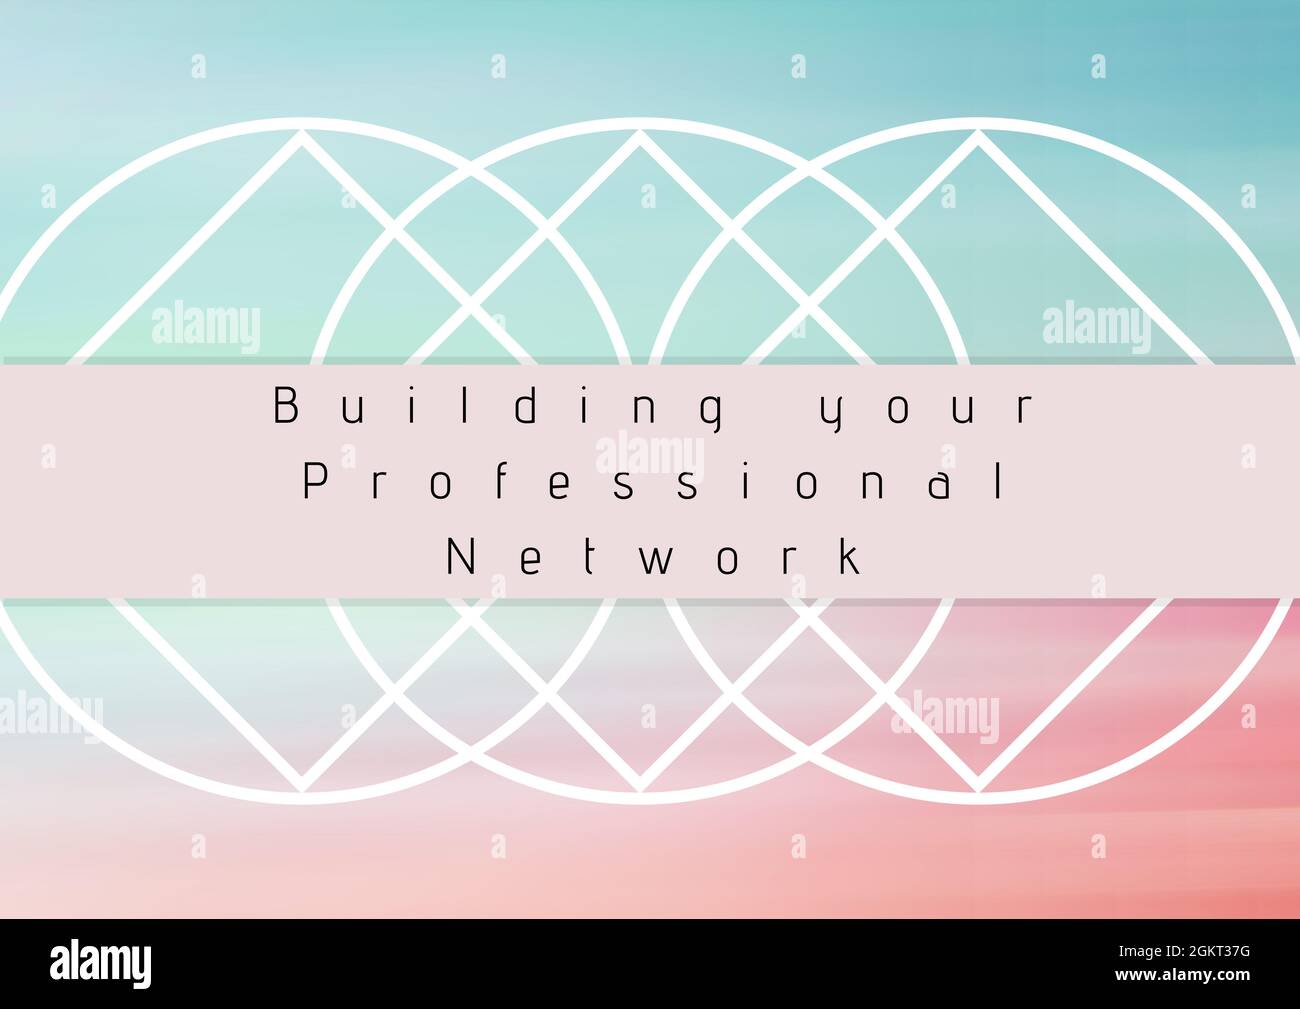 Building your professional network text against geometric shapes on gradient background Stock Photo